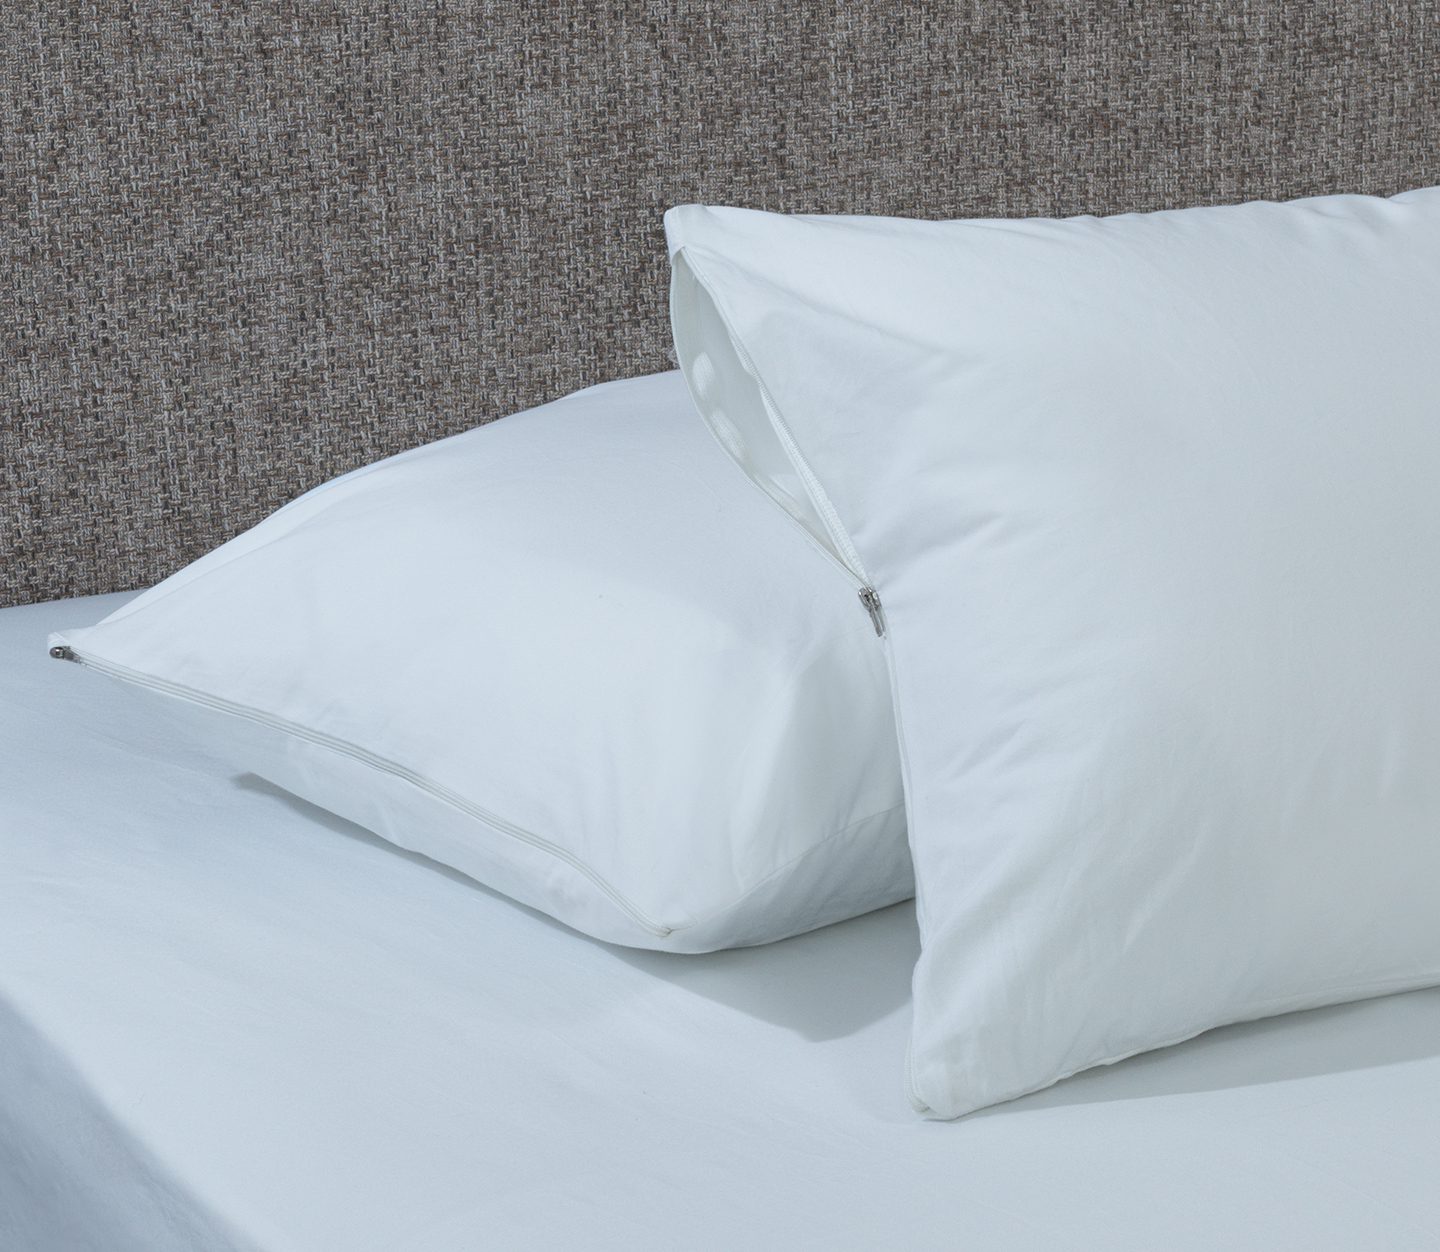 5 Reasons Why You Should Avoid Sleeping on a Cotton Pillowcase